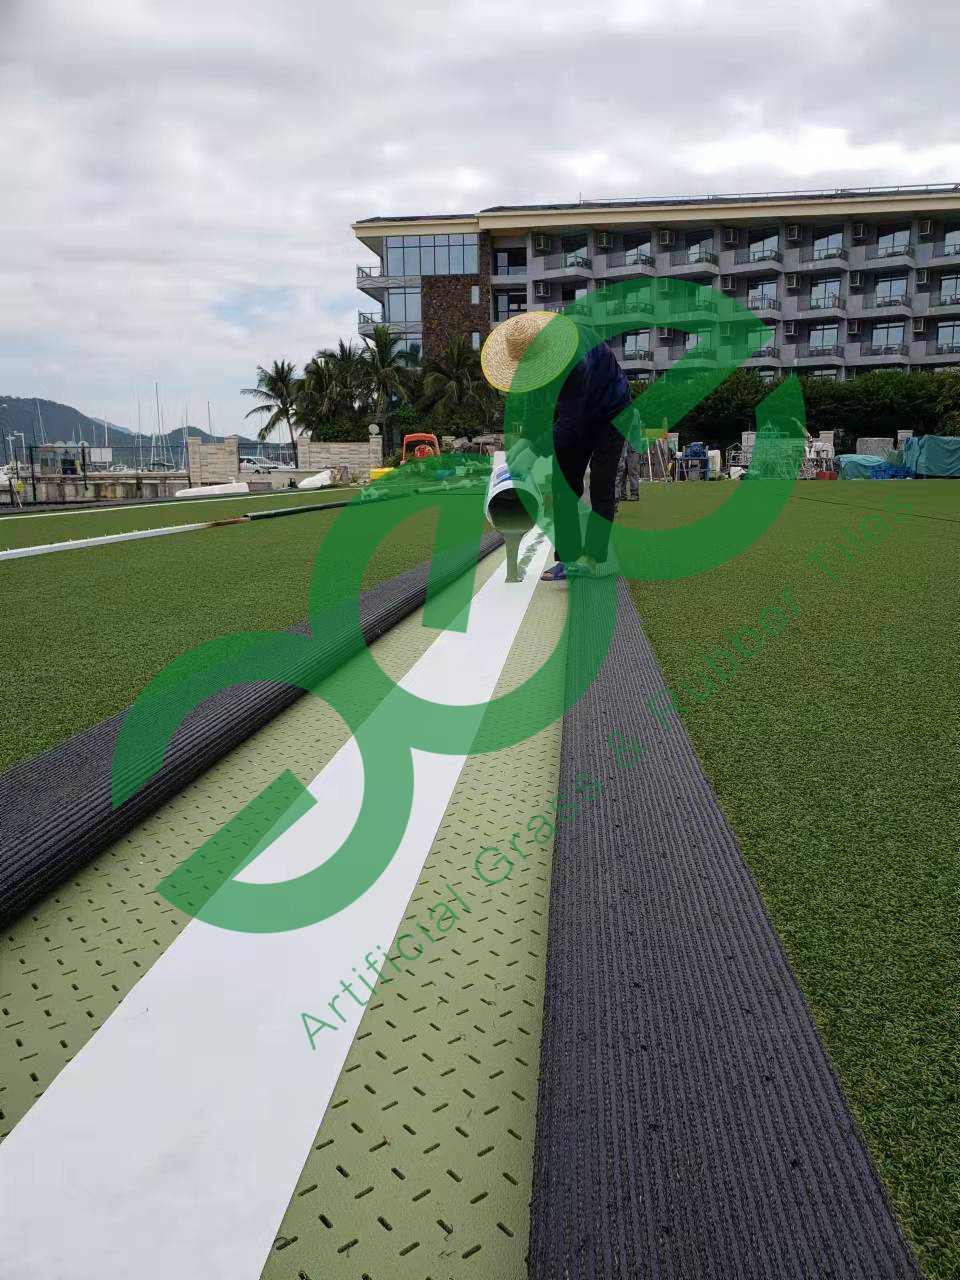 Differnt Seam Tapes for Seaming Artificial Grass